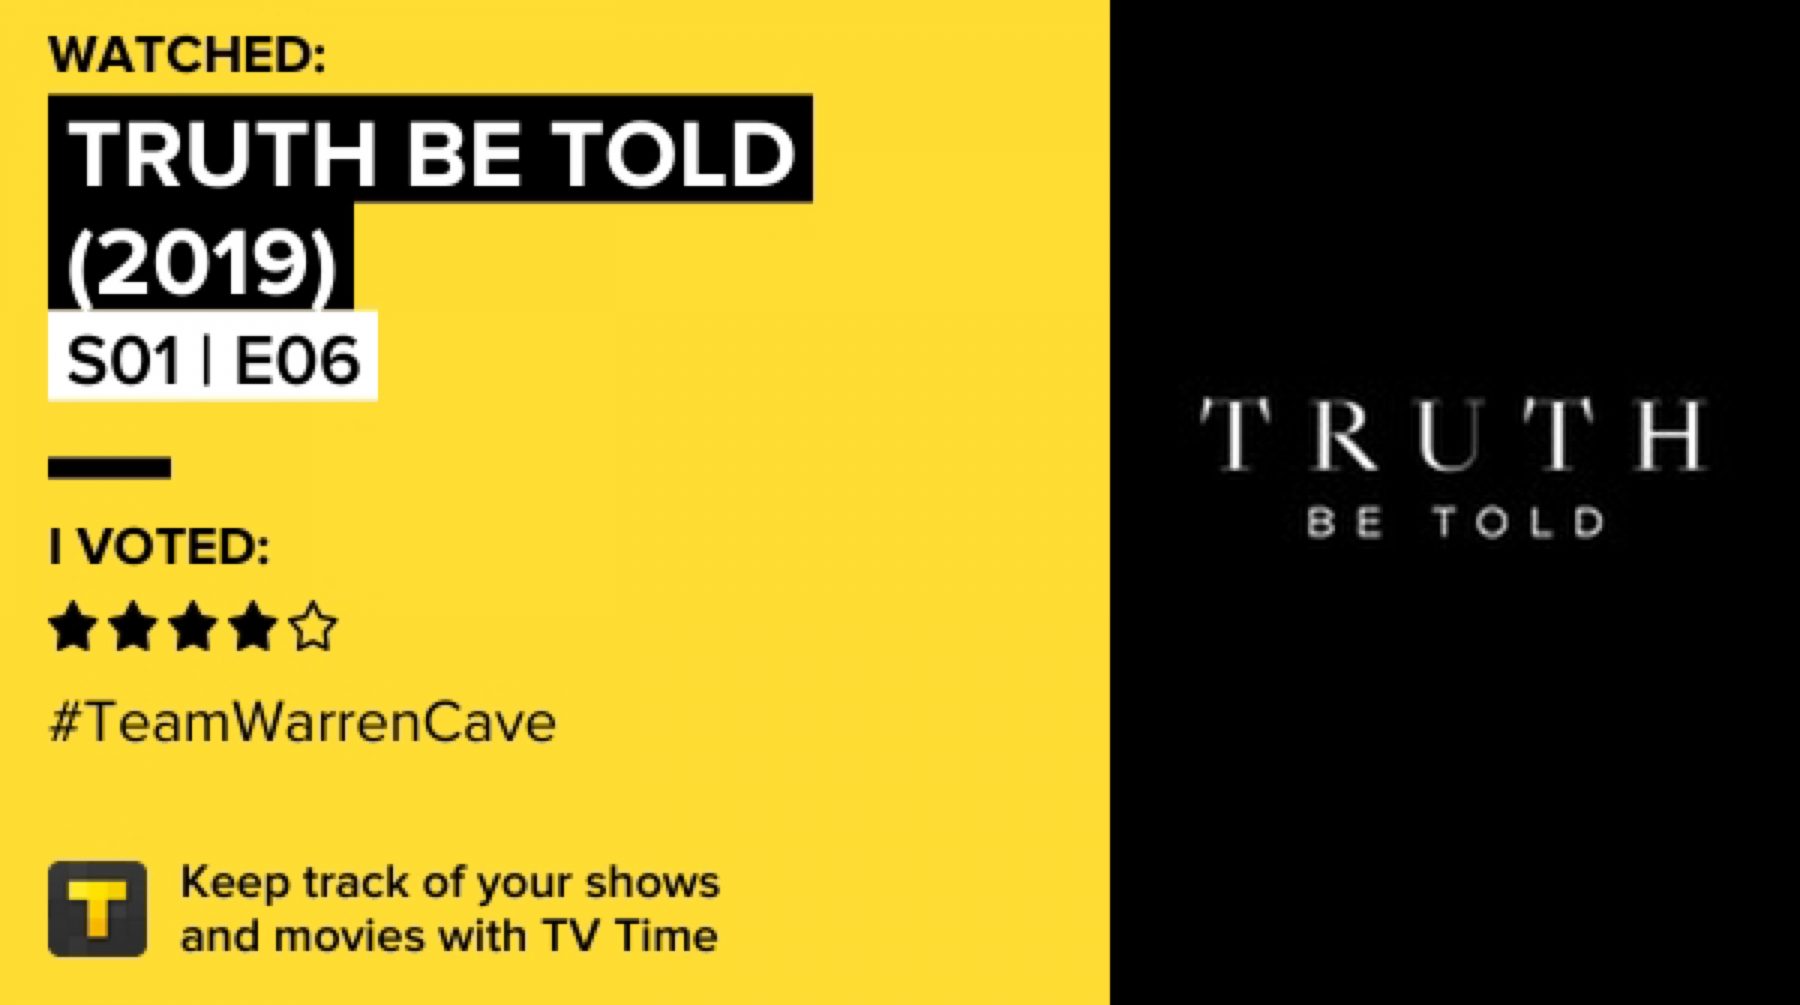 Watched Truth Be Told (2019) Season 1 Episode 6: "Not Buried, Planted"